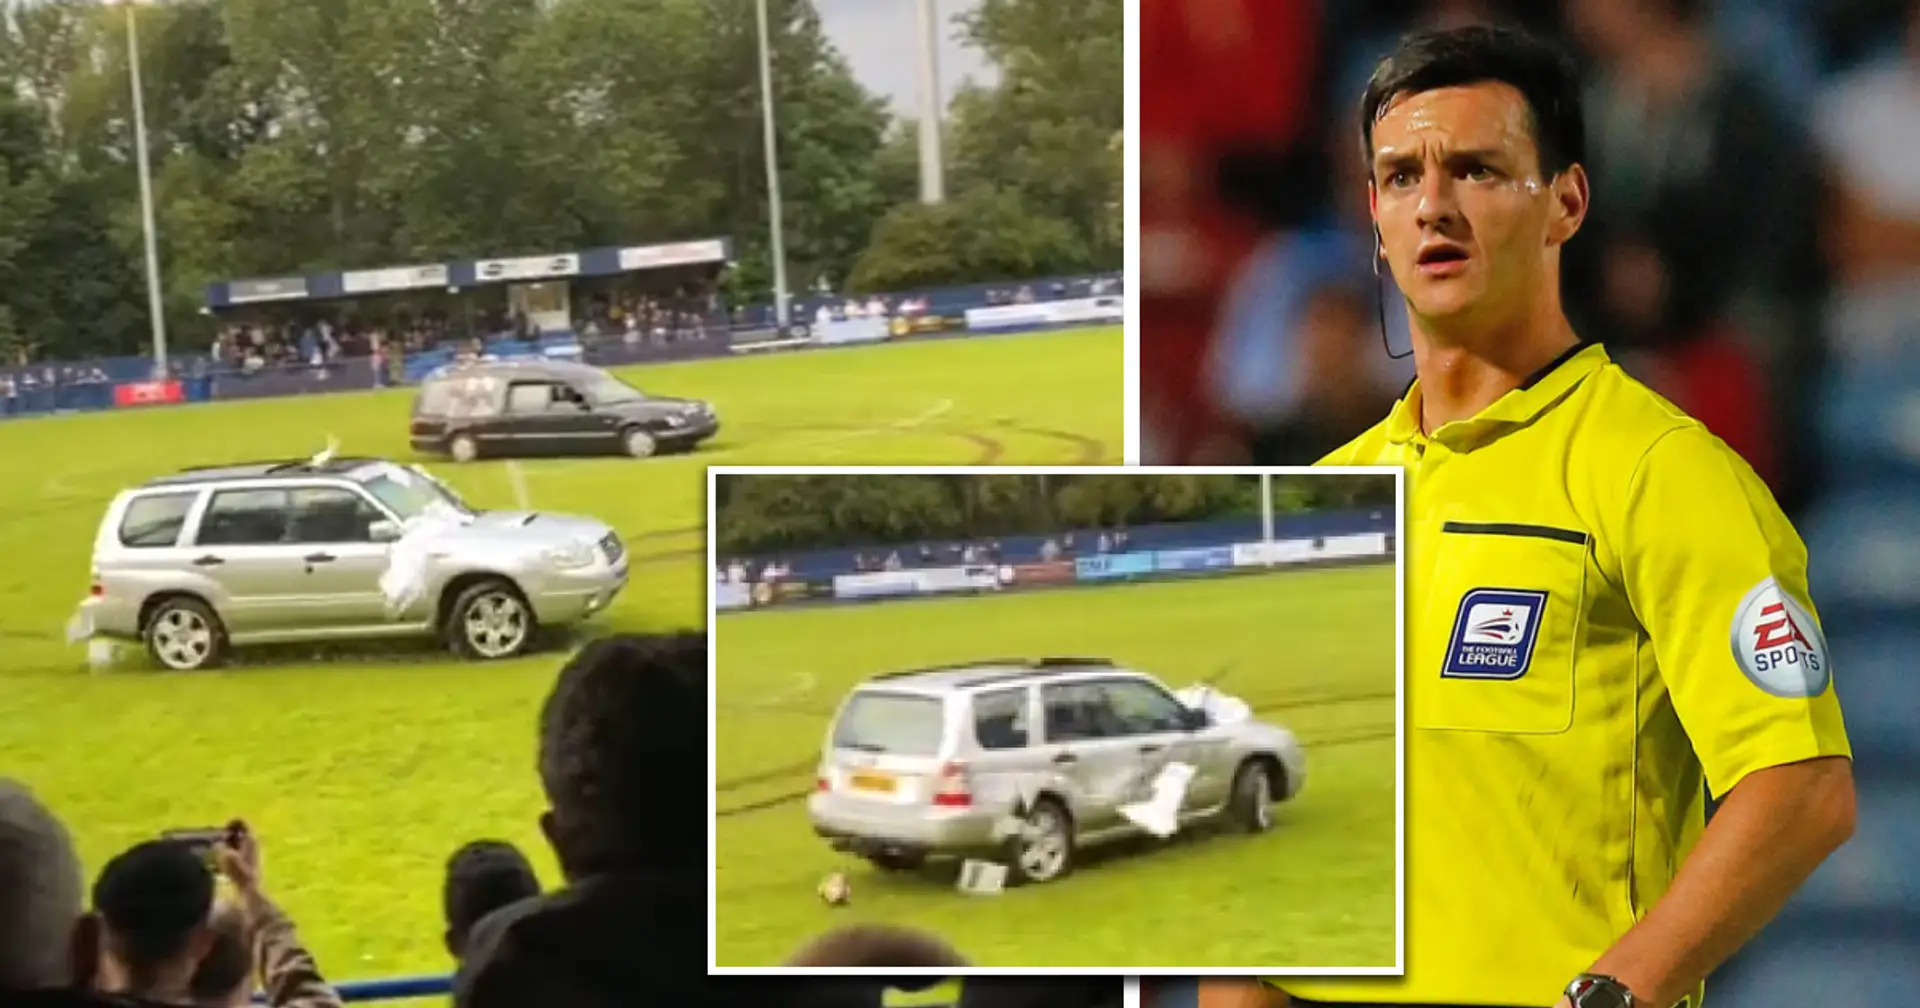 Chaos erupts at Dunston football match as masked men in hearse storm pitch